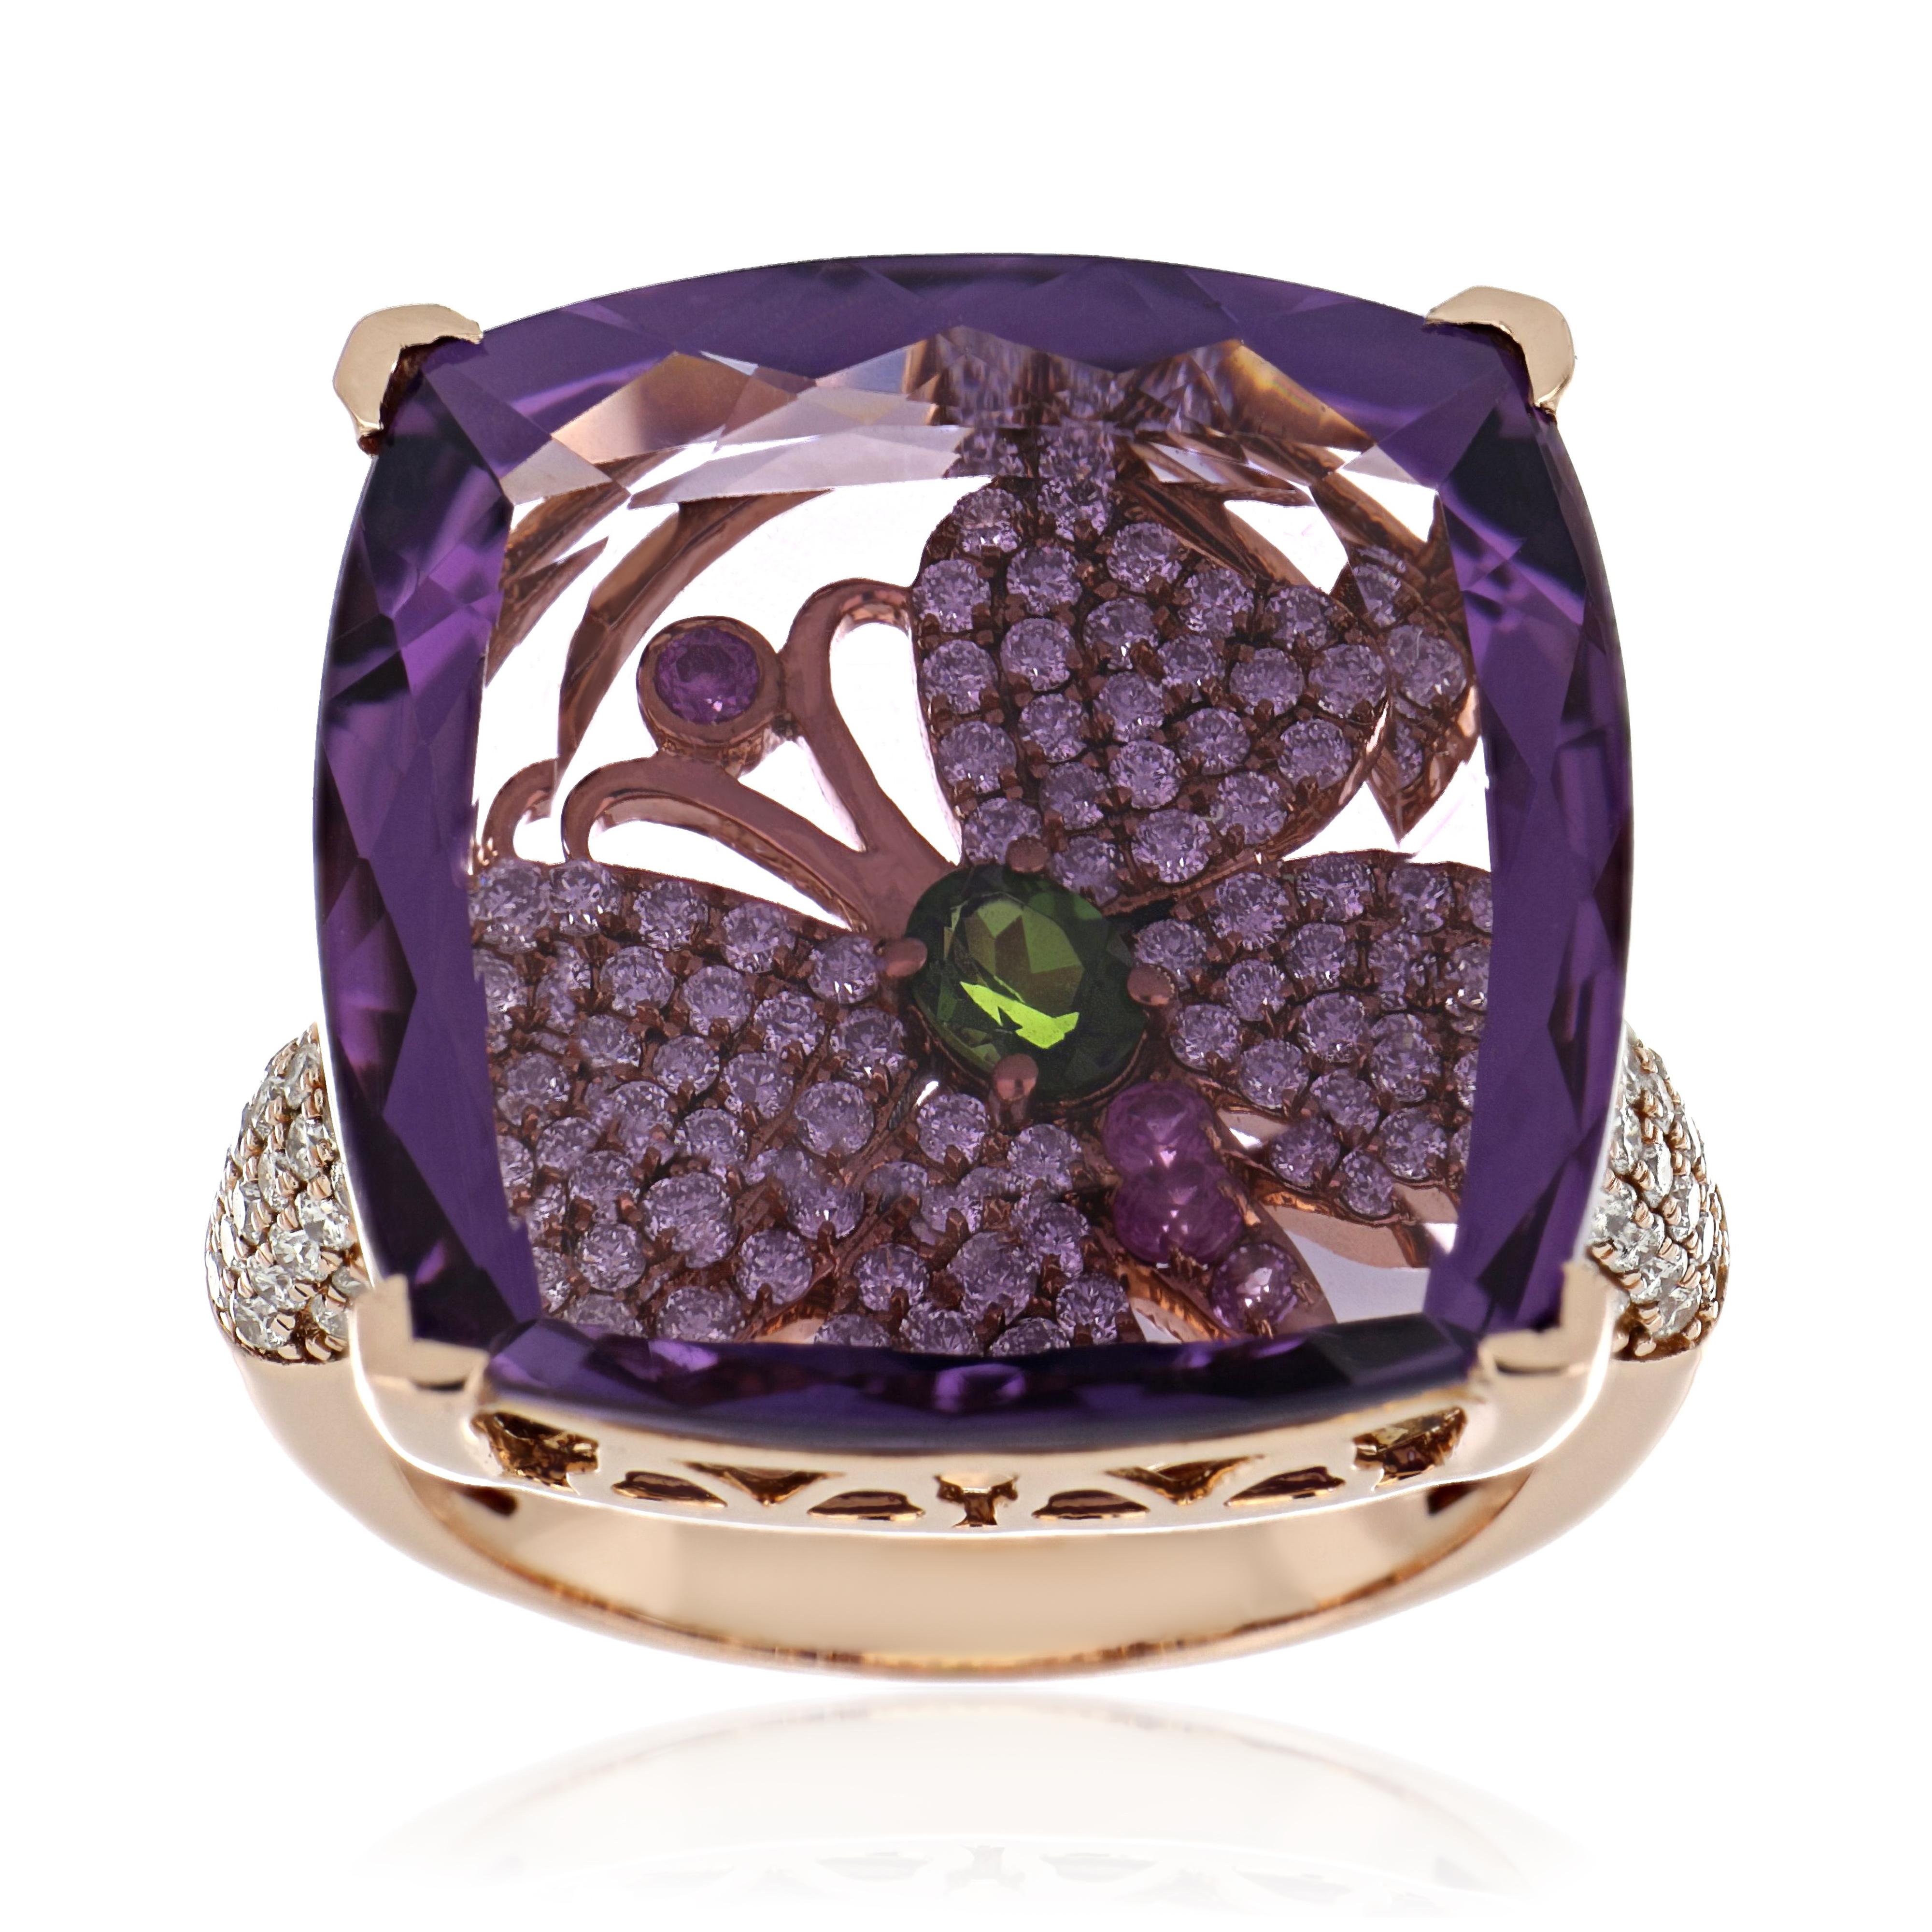 14 Karat Rose Gold ring studded with Cushion Cut  19.45 Ct  Amethyst,  with unique under stone setting of 0.20 Ct Chrome Diopside and 0.05 Ct Pink Sapphire  accented with 0.88 Cts Diamond Beautifully hand crafted in 14 Karat Rose Gold.

Stone